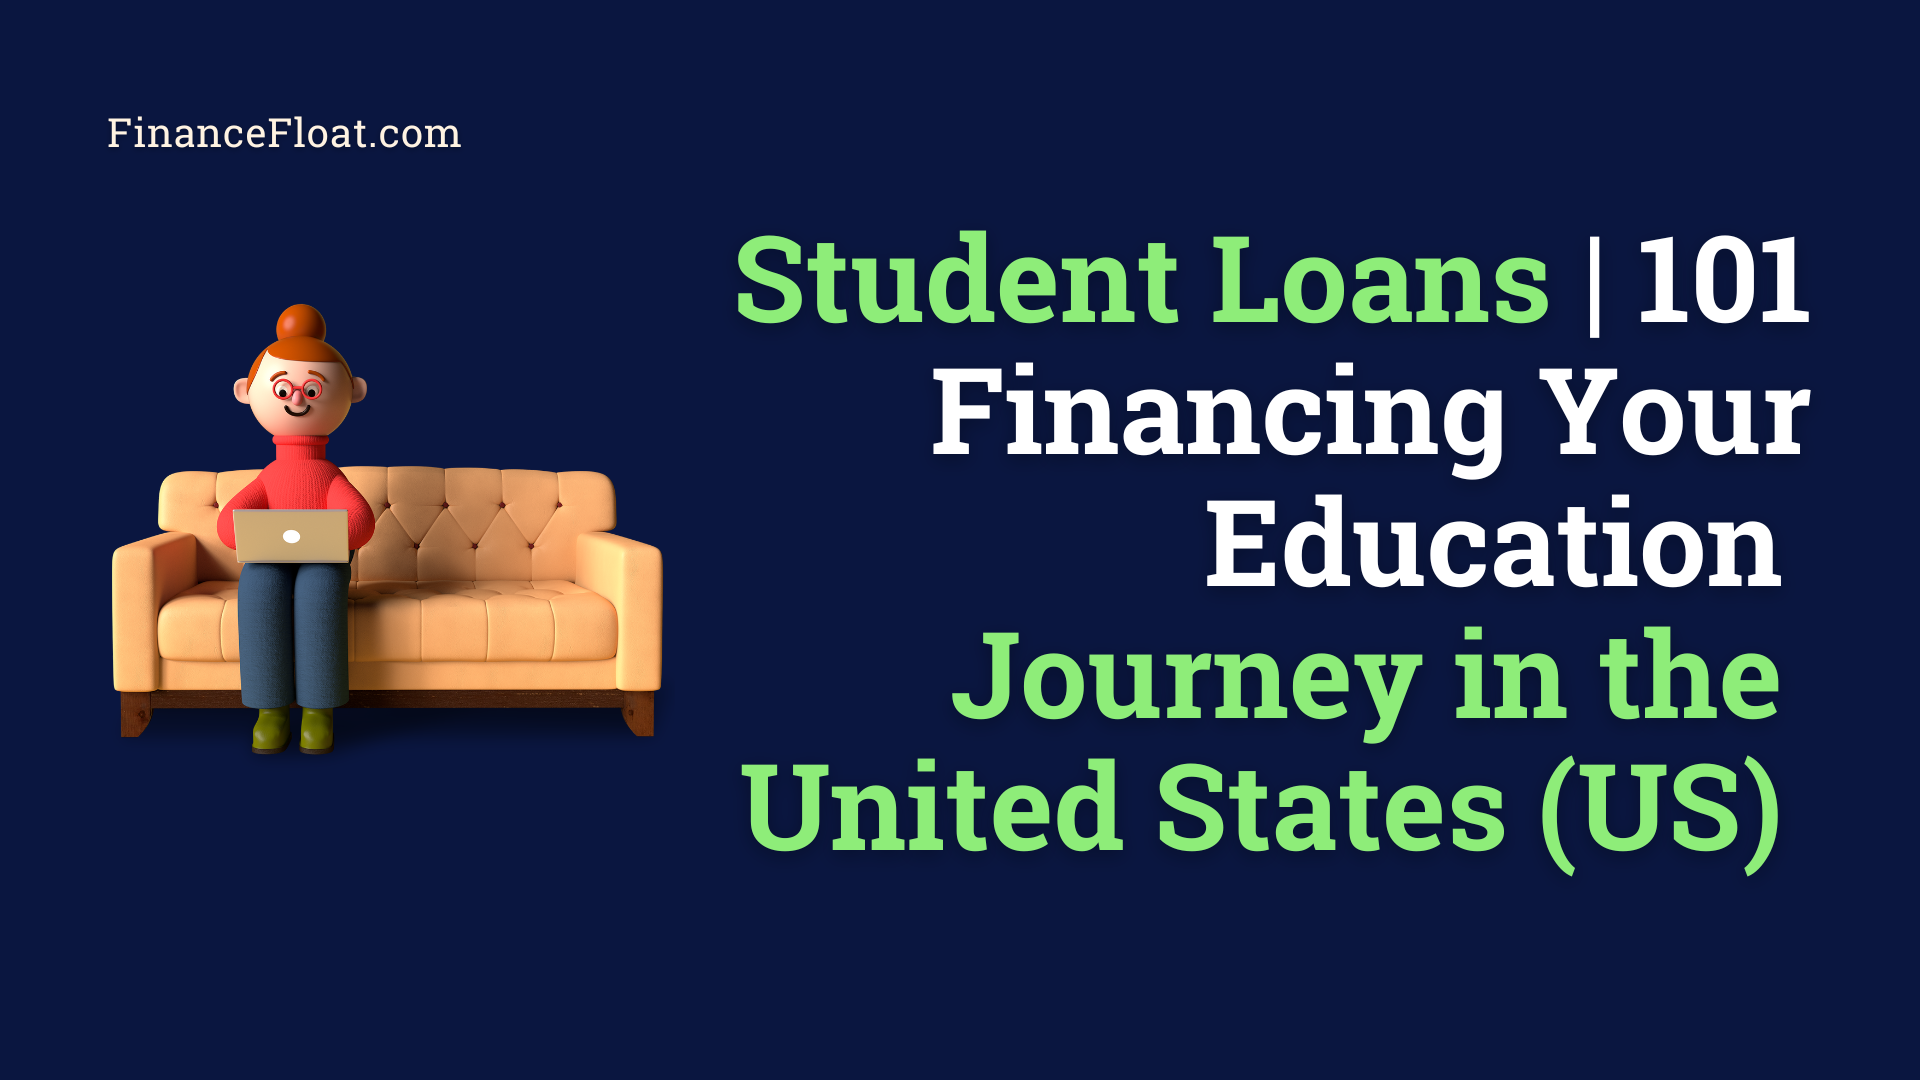 Student Loans 101 Financing Your Education Journey in the United States